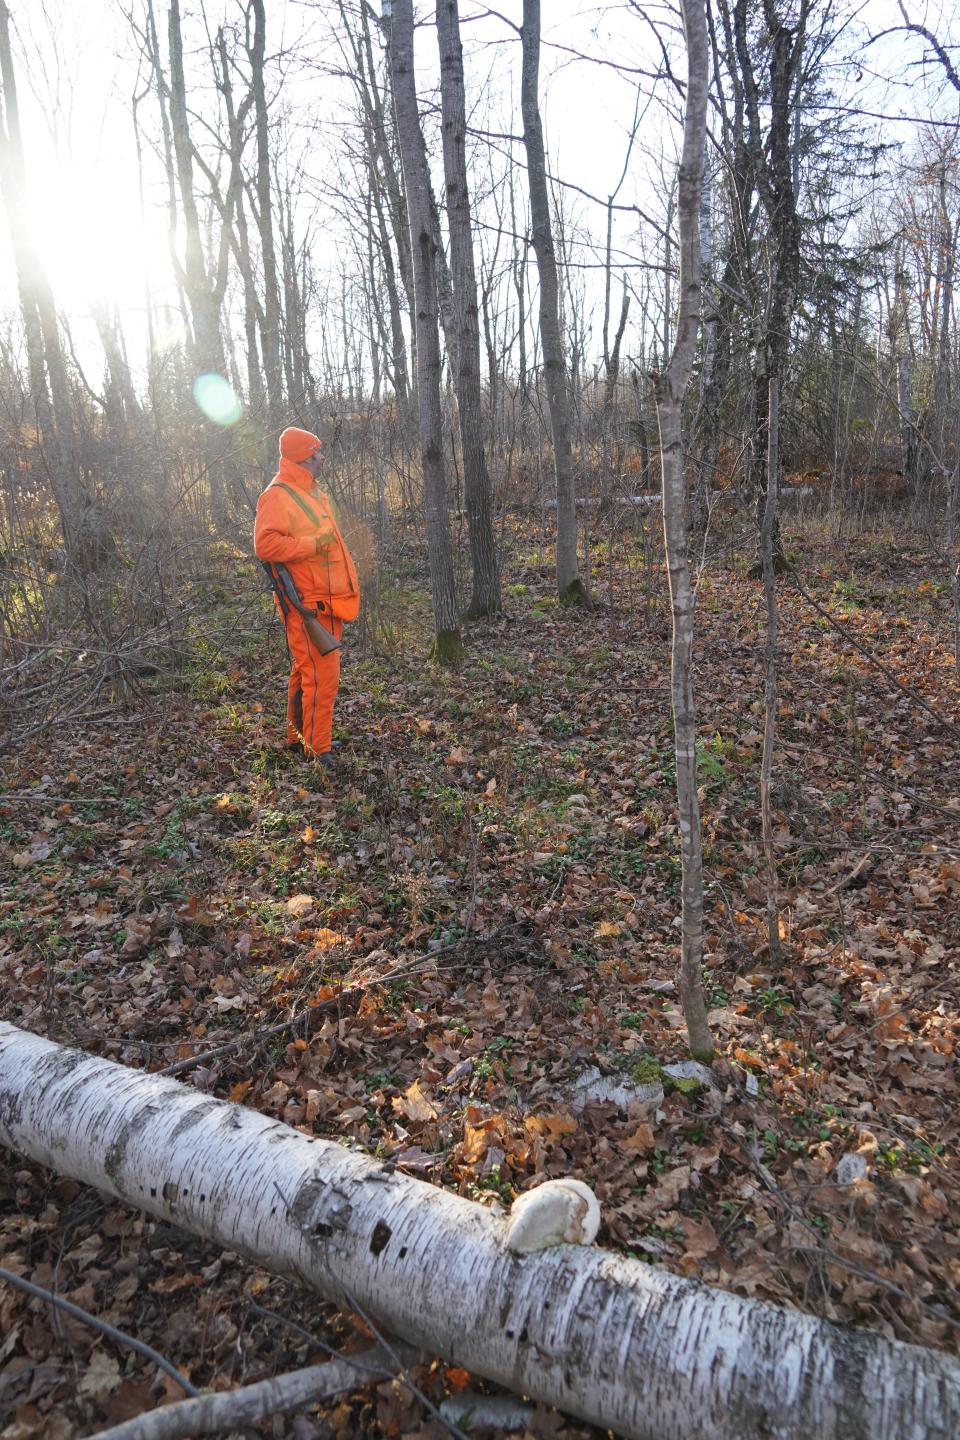 Thor Stolen of Milwaukee walks to a stand while on a deer hunt Nov. 18 on Madeline Island.